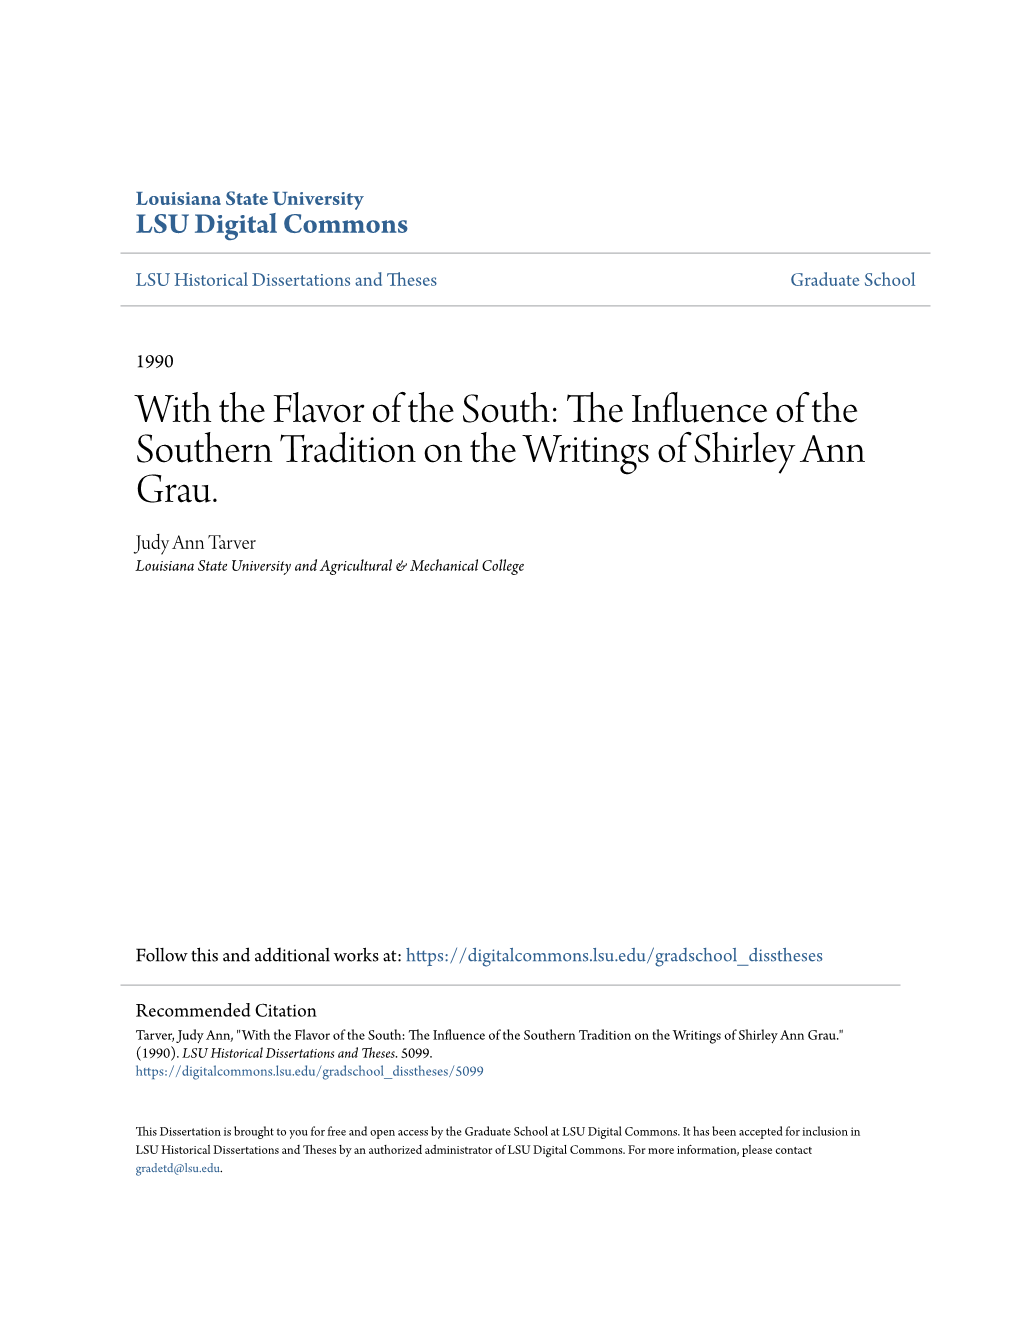 With the Flavor of the South: the Influence of the Southern Tradition on the Writings of Shirley Ann Grau